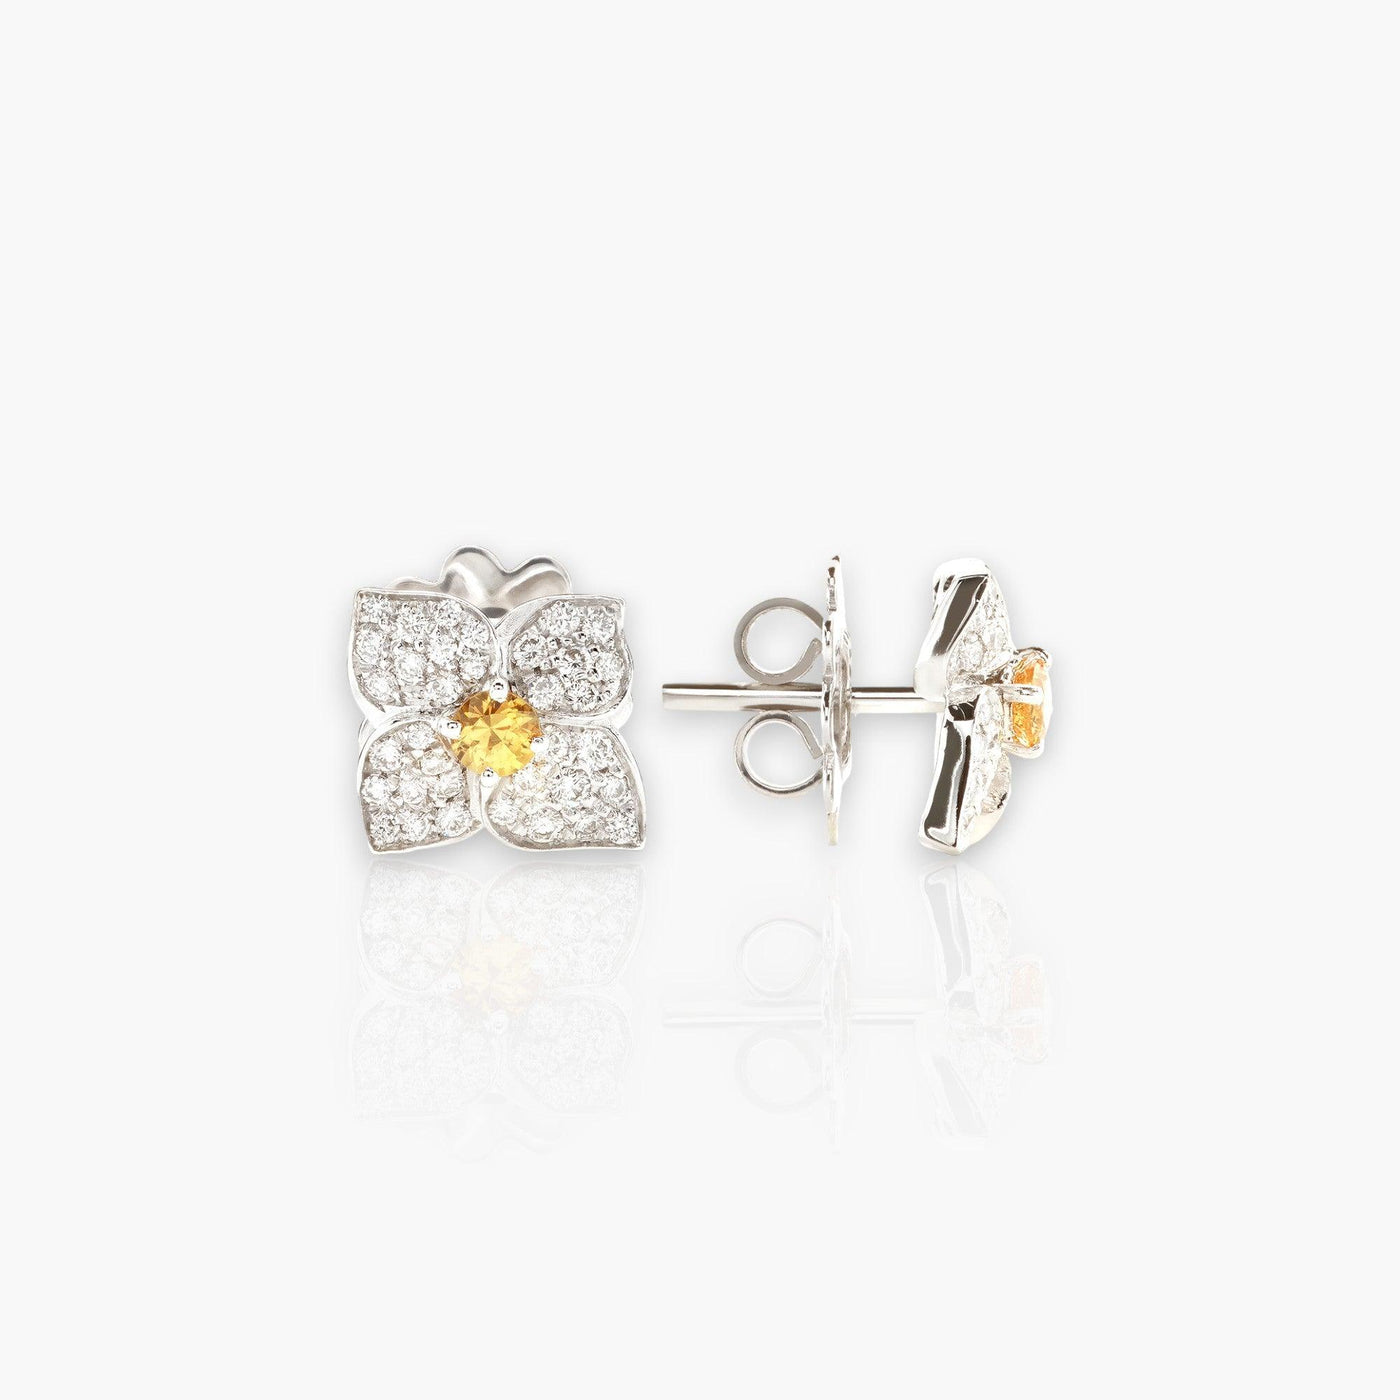 Ortensia Earrings, White Gold, Diamonds And Yellow Sapphires - Moregola Fine Jewelry